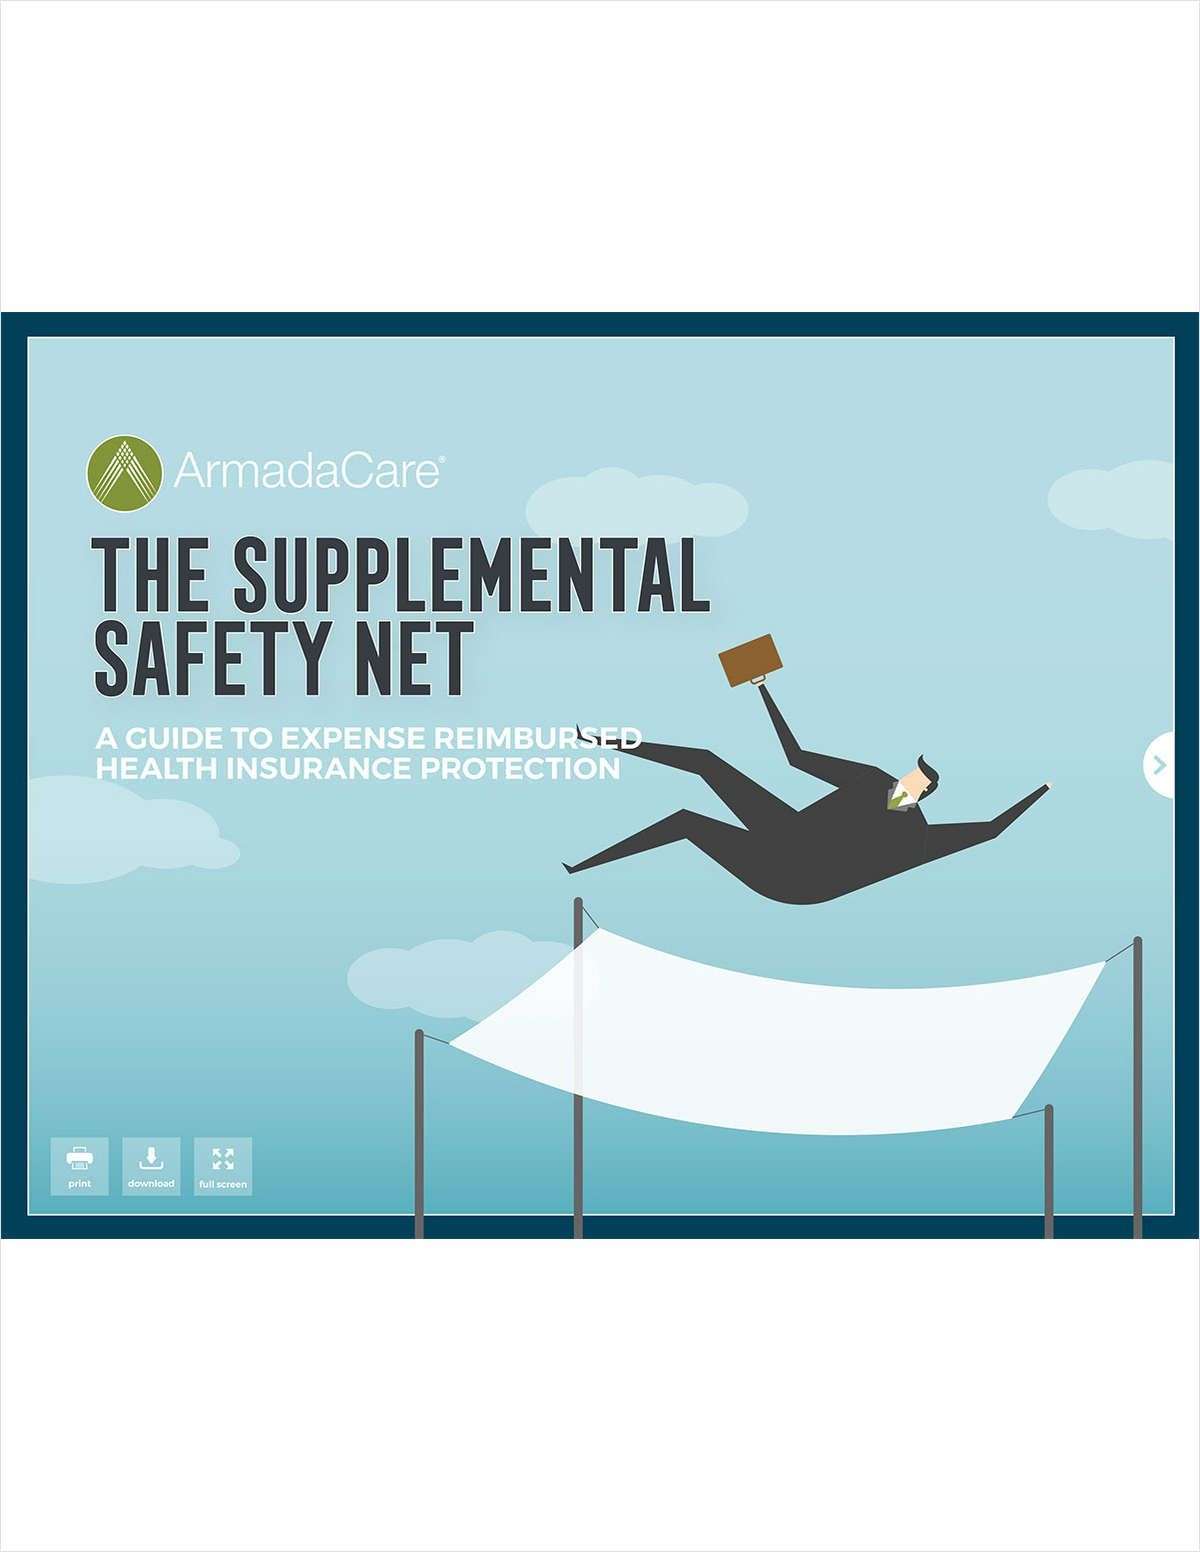 The Supplemental Safety Net: A Guide to Expense Reimbursed Health Insurance Protection